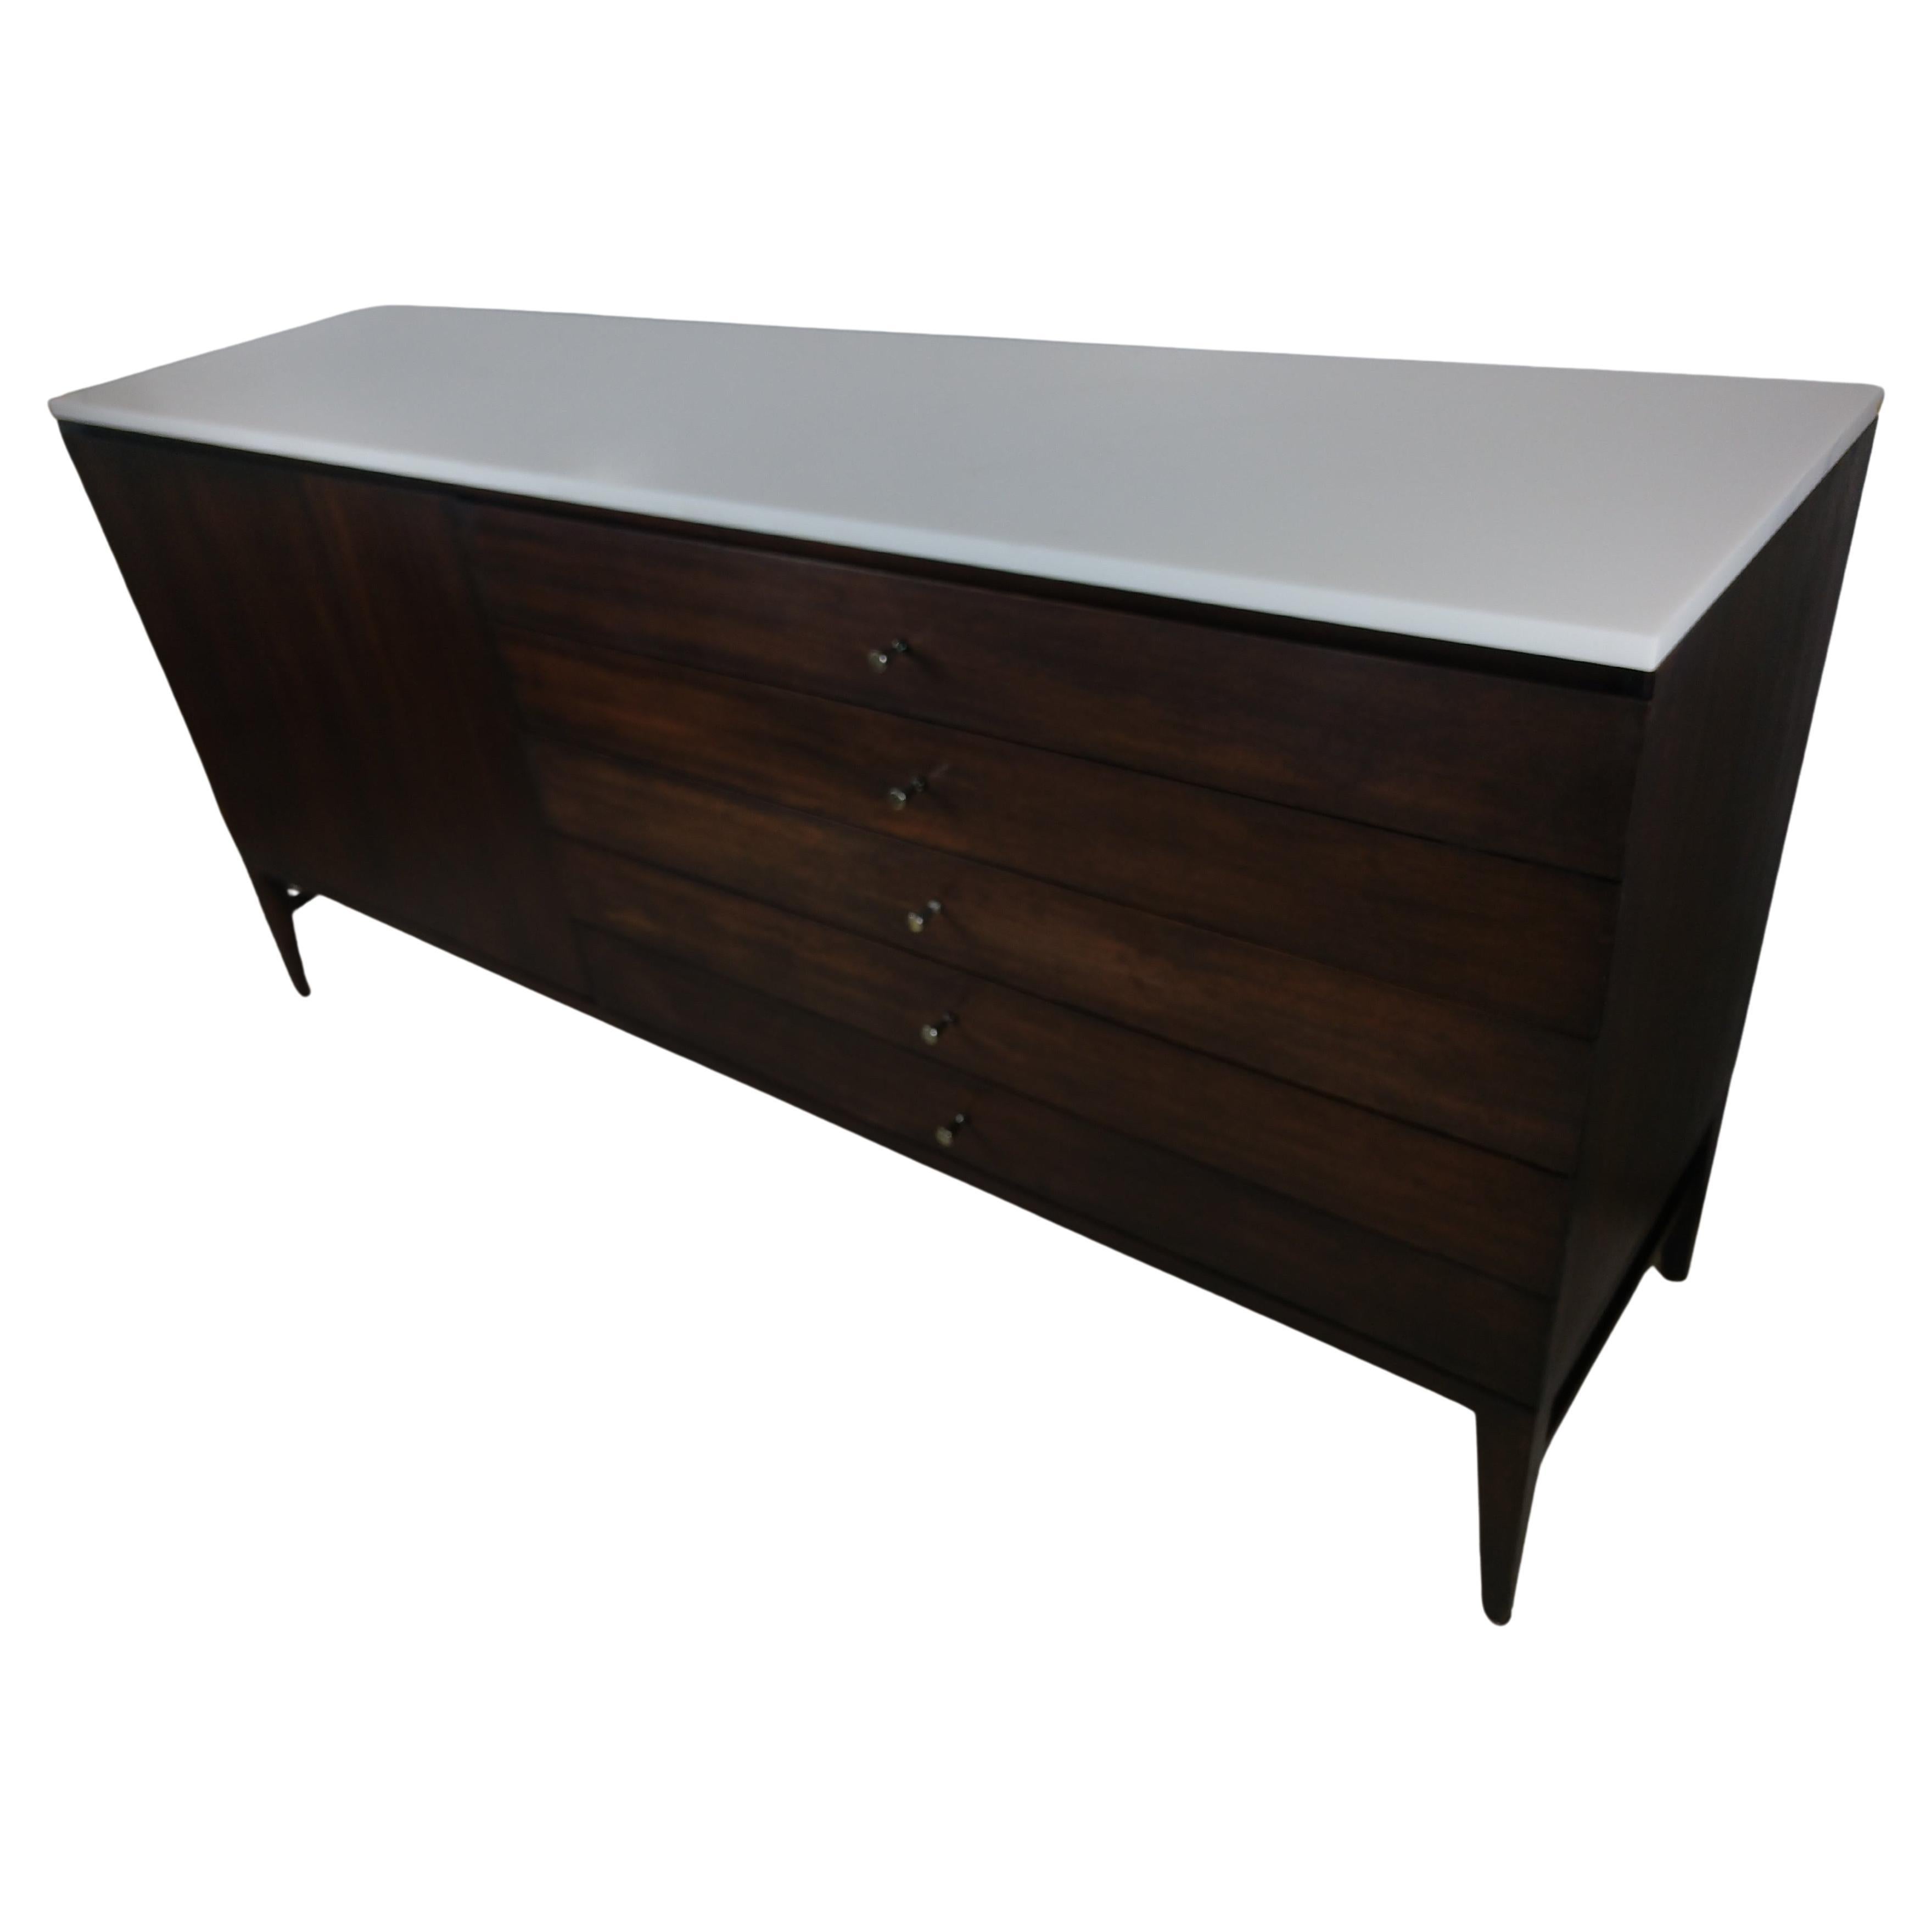 American Mid-Century Modern Mahogany w Glass Dresser Credenza by Paul McCobb for Calvin  For Sale